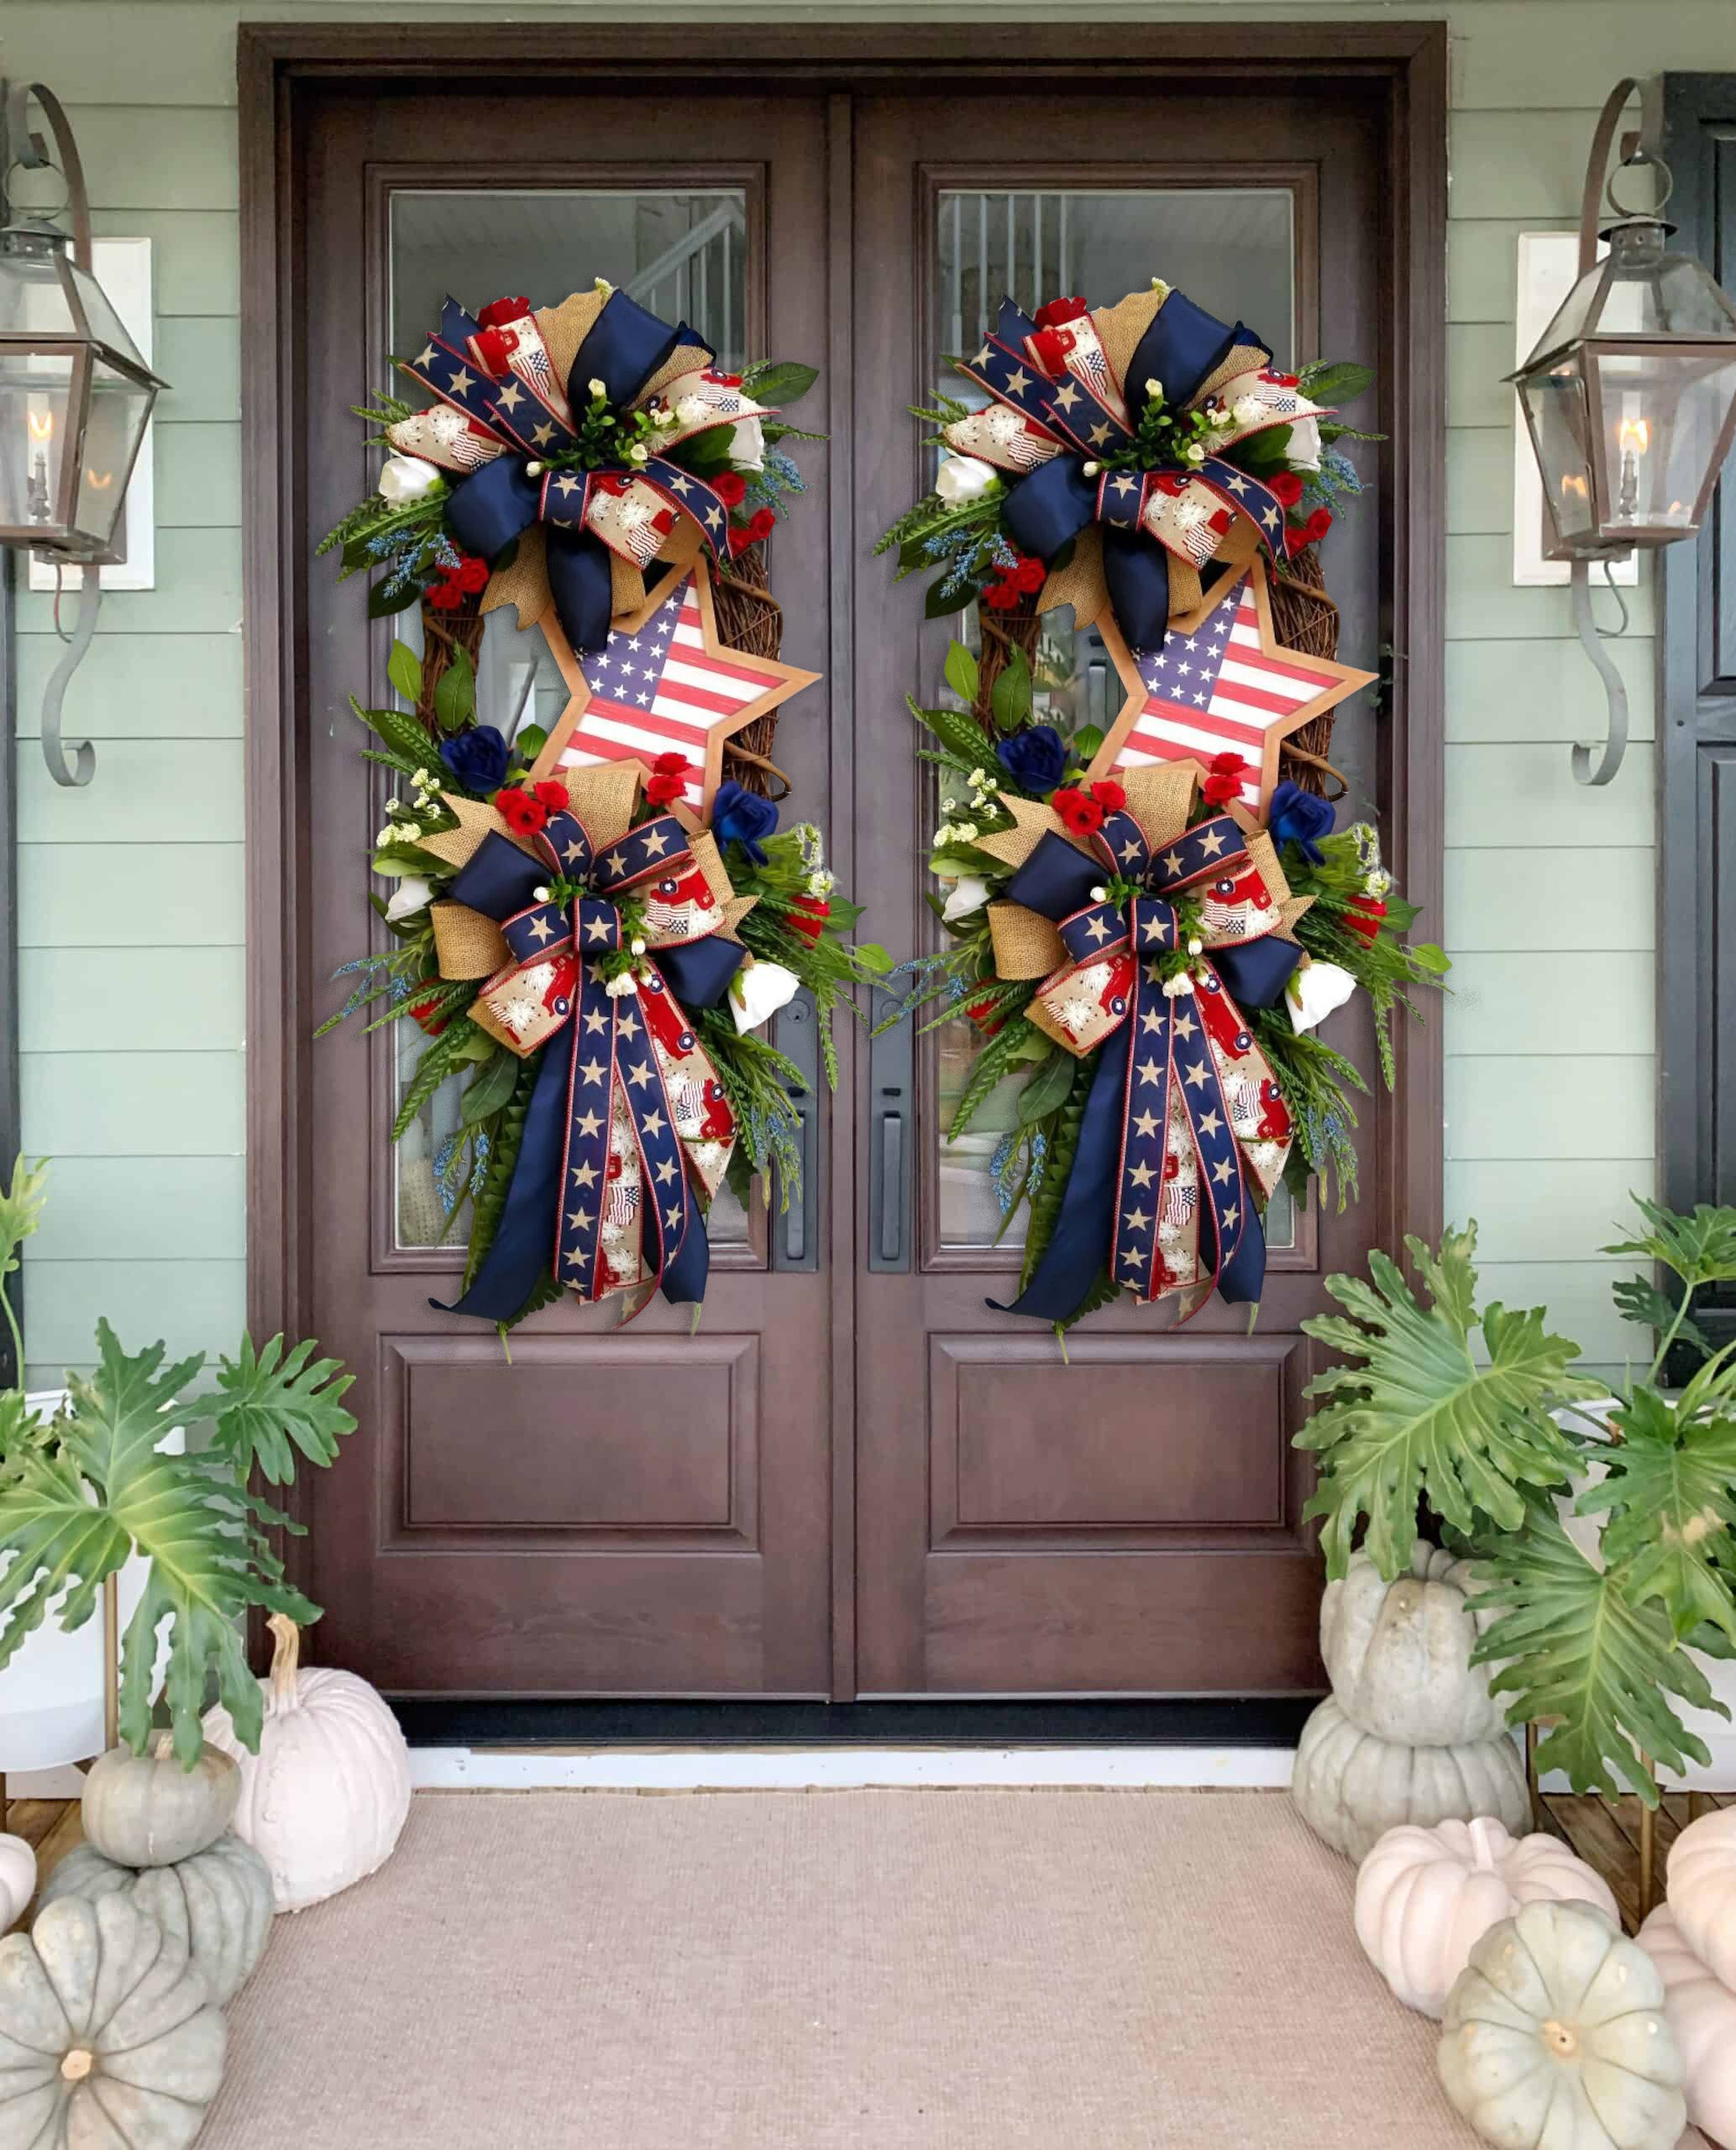 💜Hot Sale 38%OFF💜Star Patriotic Wreath-4th Of July Wreath